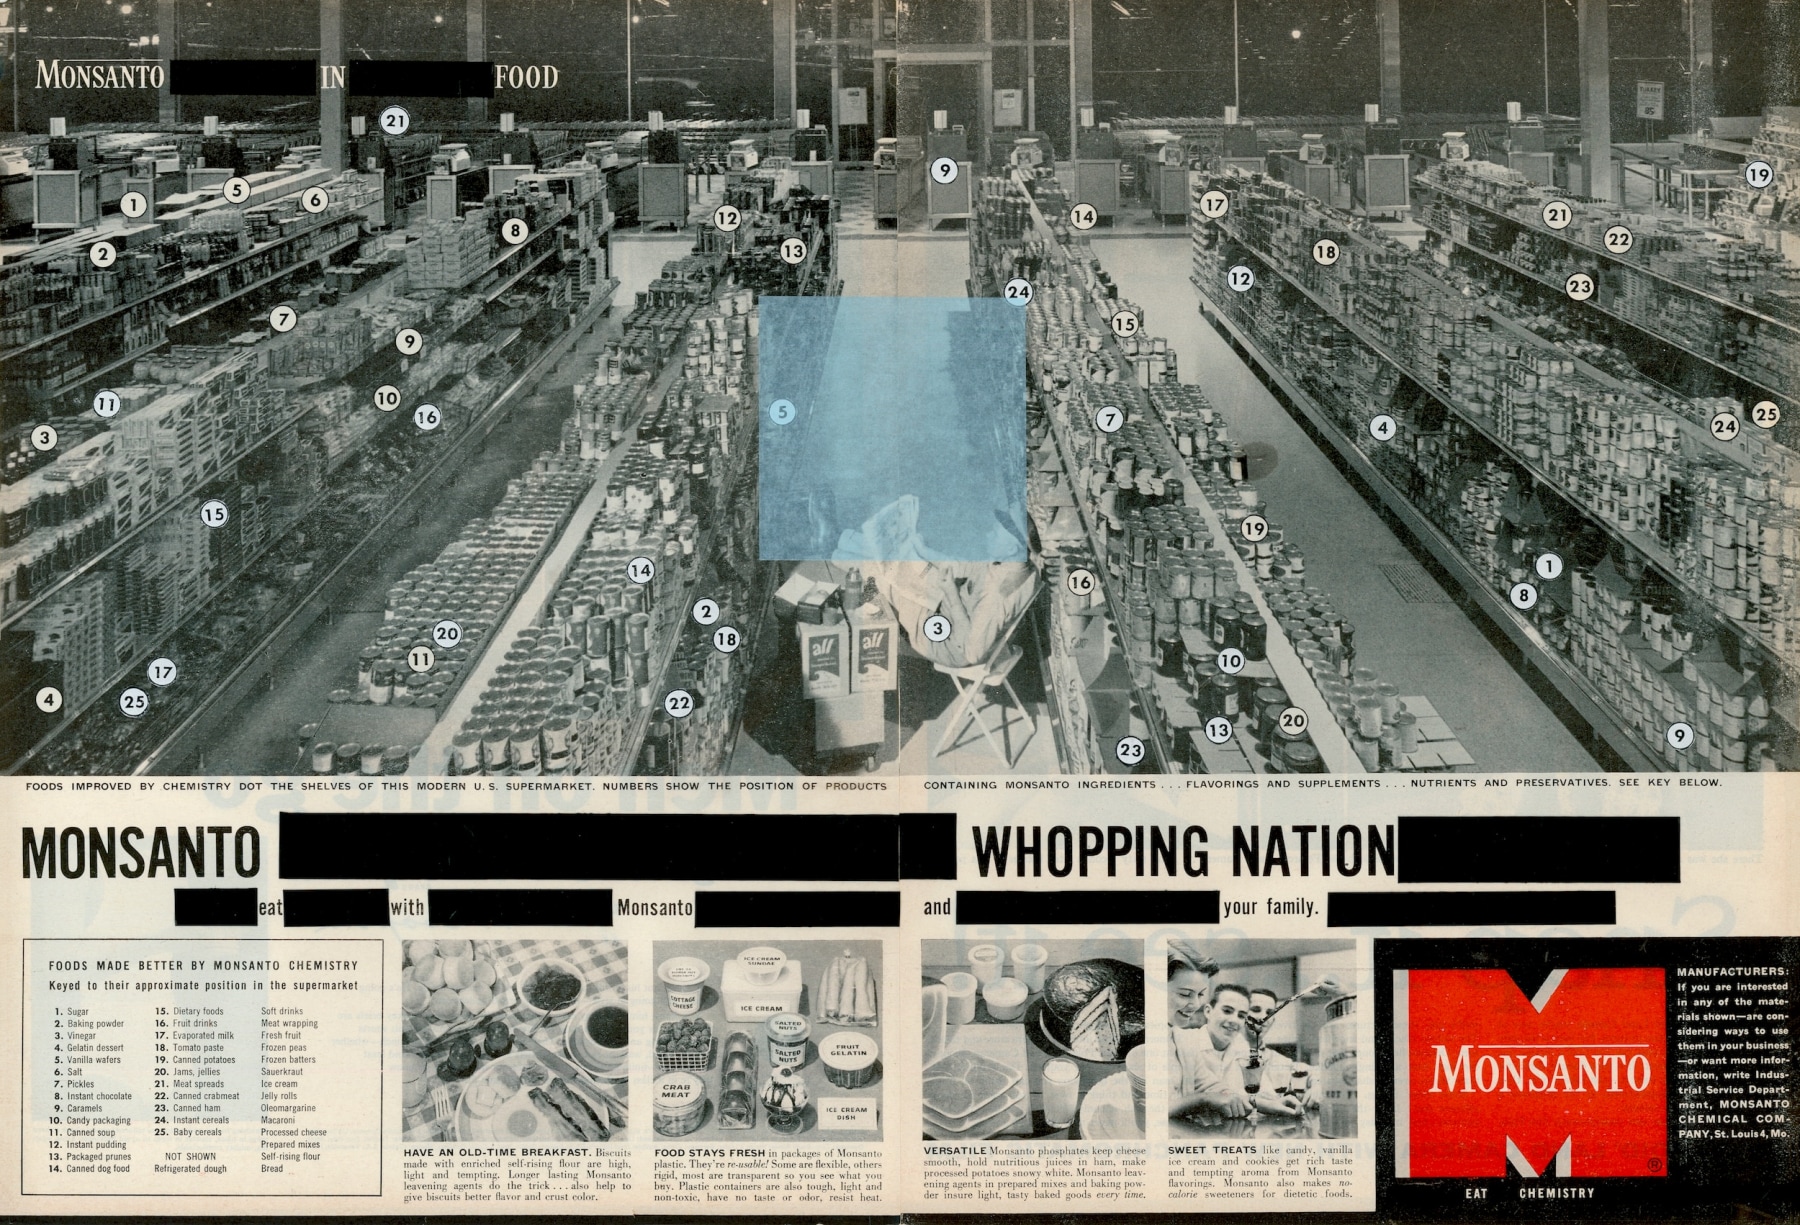 Monsanto Whopping Nation, 2022  from the series&nbsp;Science for a Better Life Collage on 1956 Monsanto advertisement  13.75 x 20 inches, black and white image of a grocery store with blue collage, redacted text